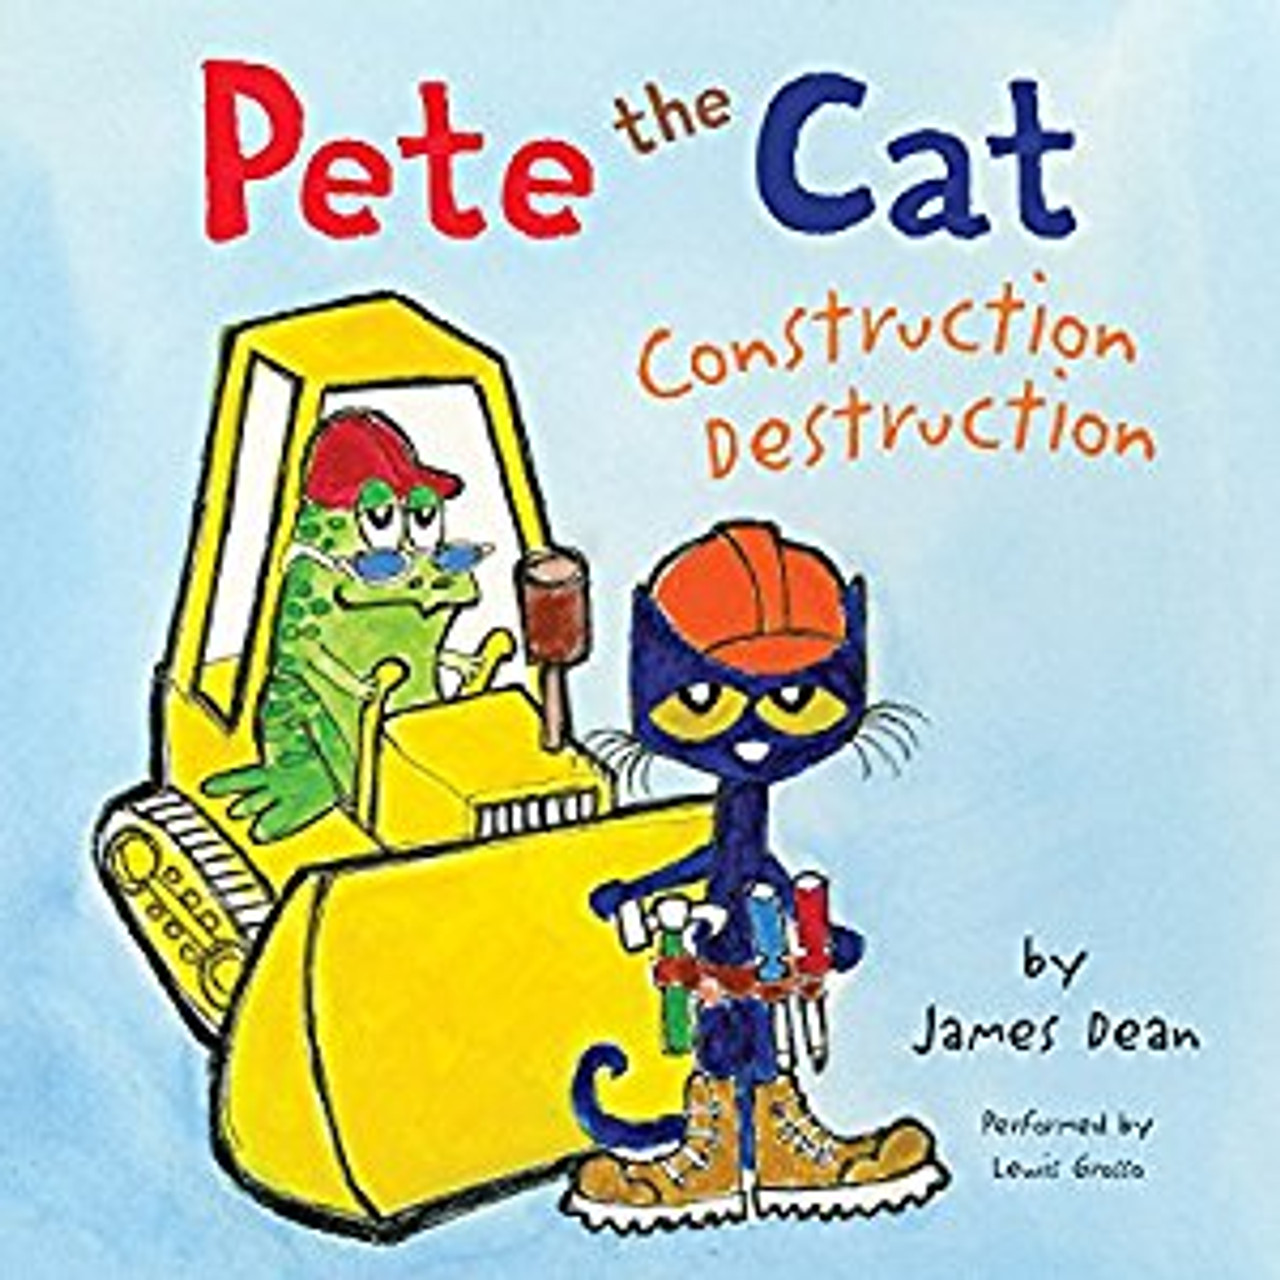 When Pete sees that the playground is in bad shape, he gets a totally groovy idea--make a new one! Pete calls in construction workers and cement mixers, backhoes and dump trucks to build the coolest playground ever. But when his plans don't work out, Pete learns that no matter what, you have to dream big.